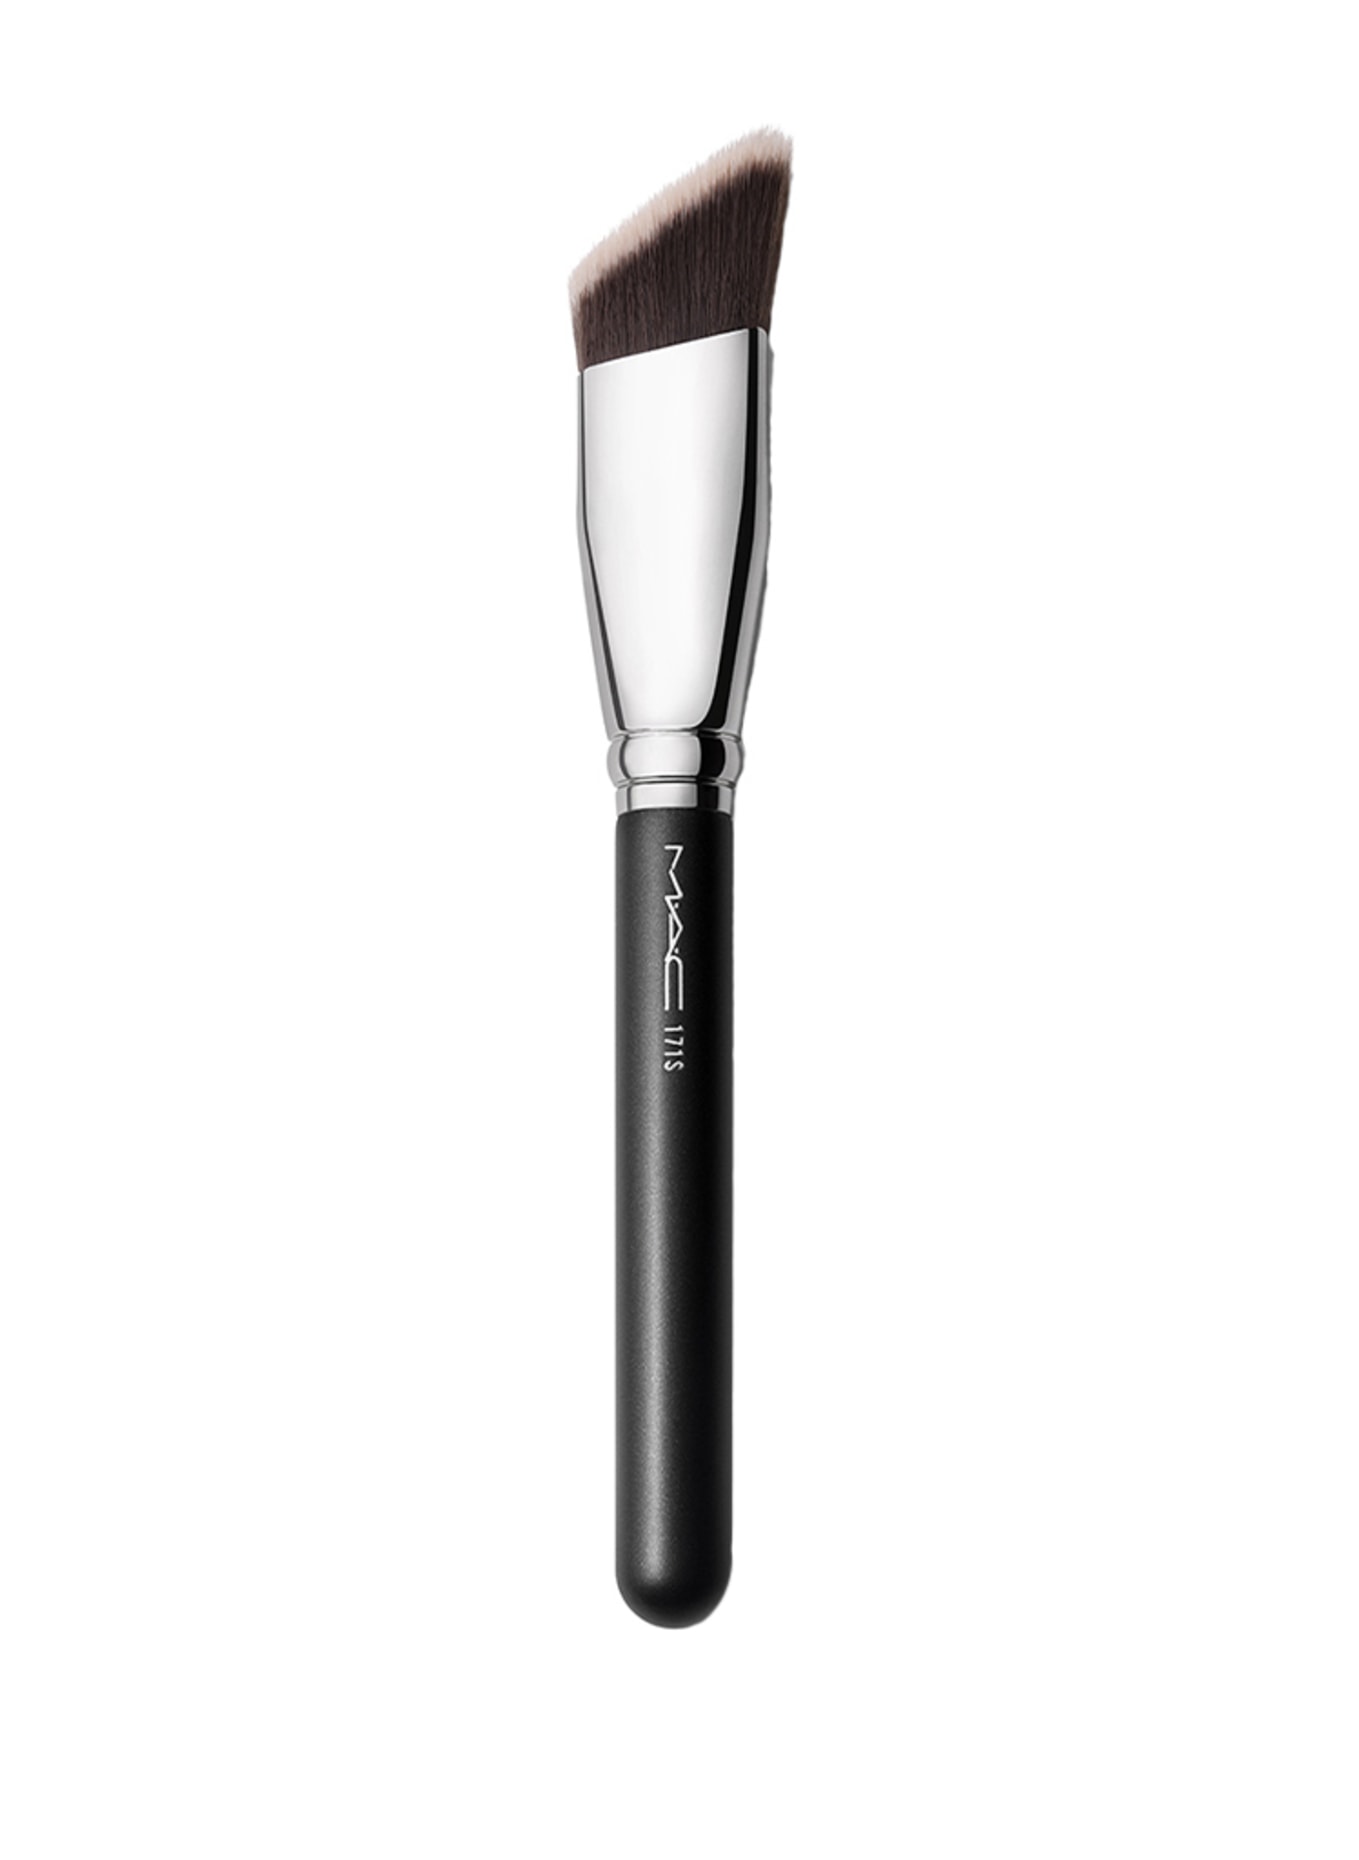 M.A.C SMOOTHE EDGE ALL OVER FACE BRUSH (Obrazek 1)